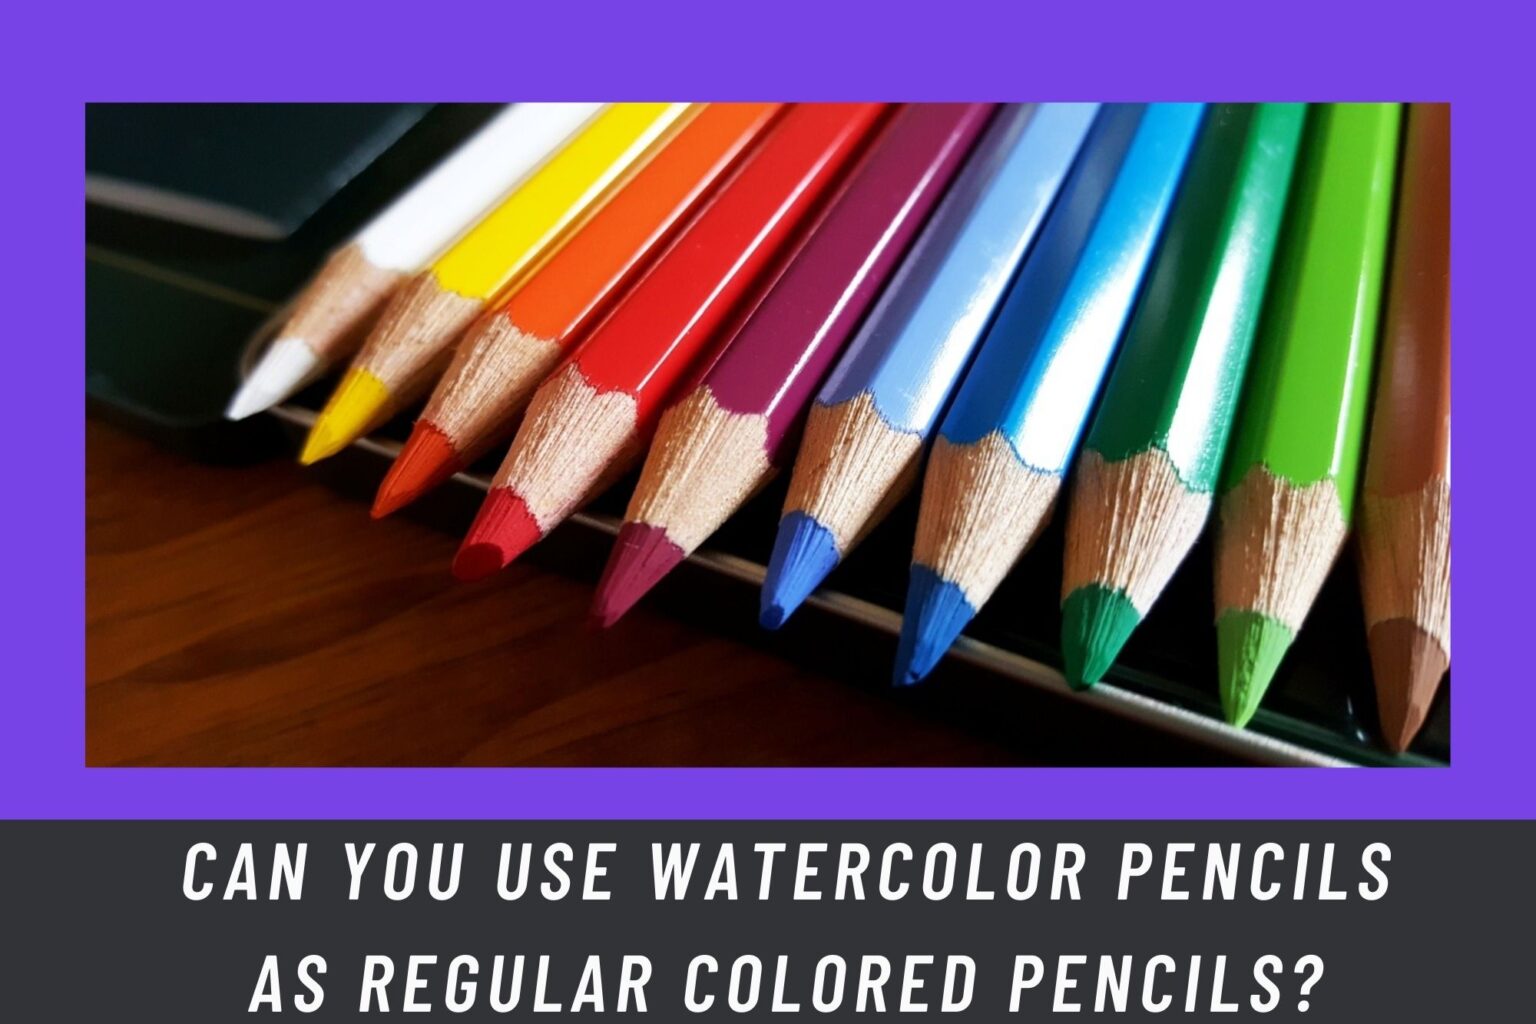 watercolor-pencils-as-regular-colored-pencils-everything-you-need-to-know-the-art-suppliers